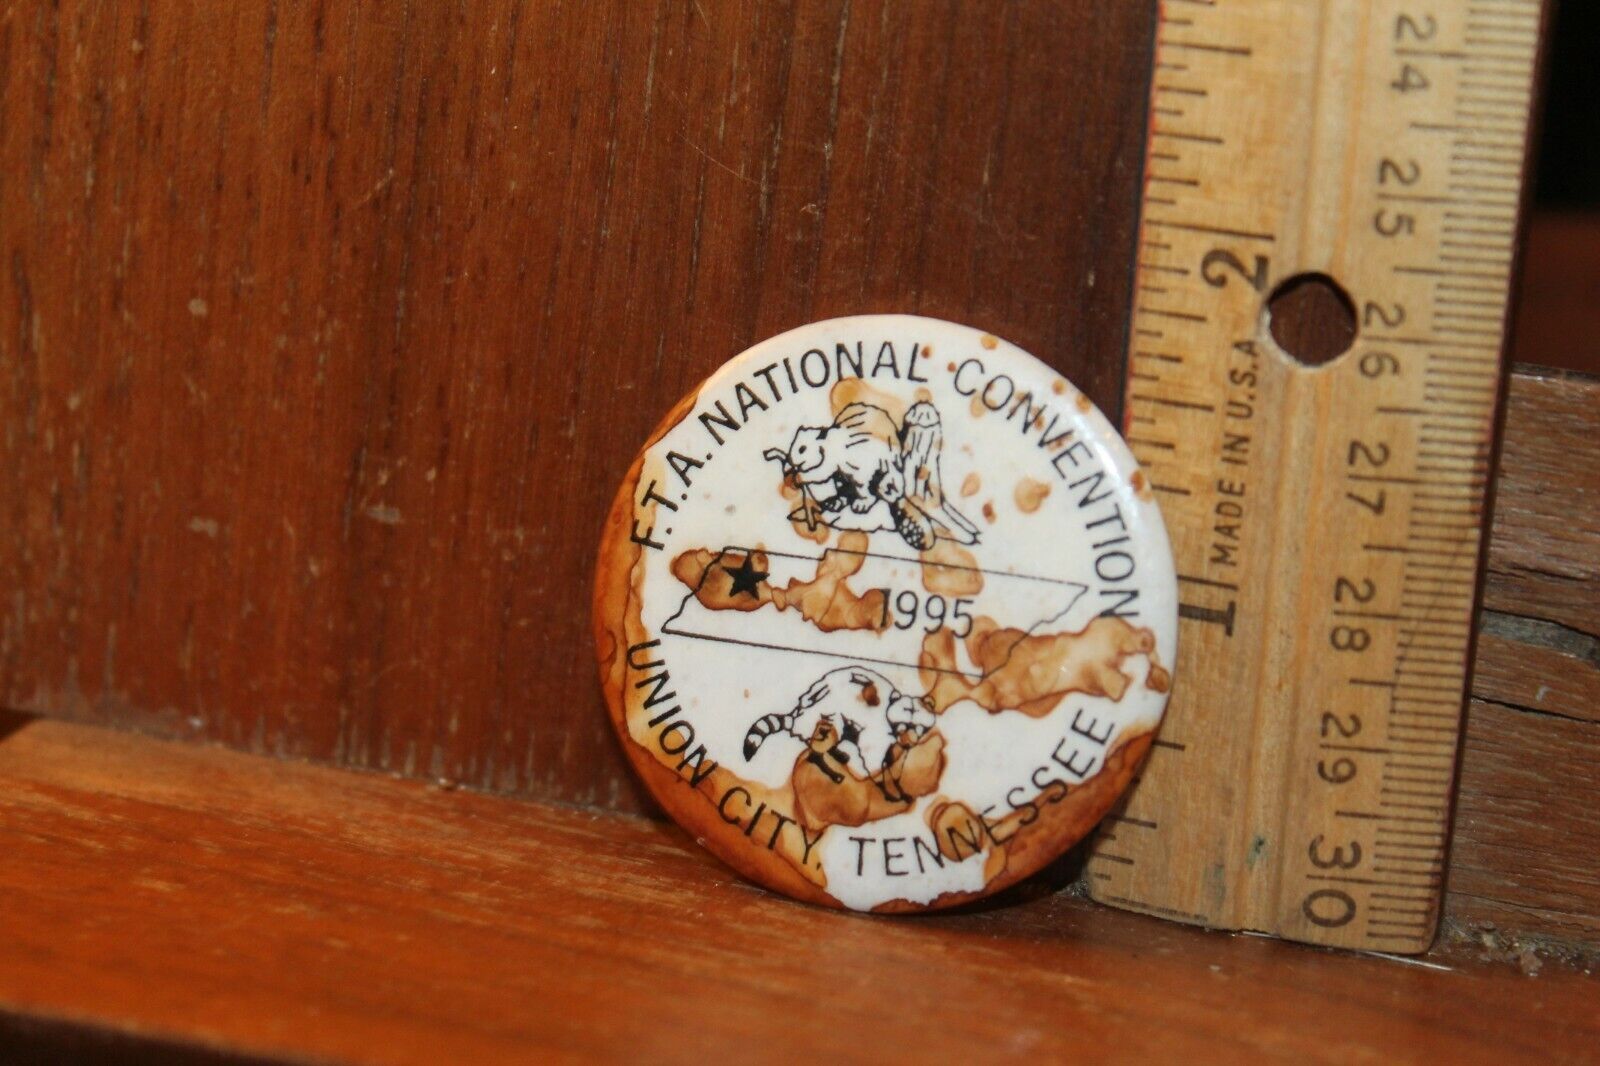 Vintage 1995 FTA Fur Takers America National Convention Button Union City TN 